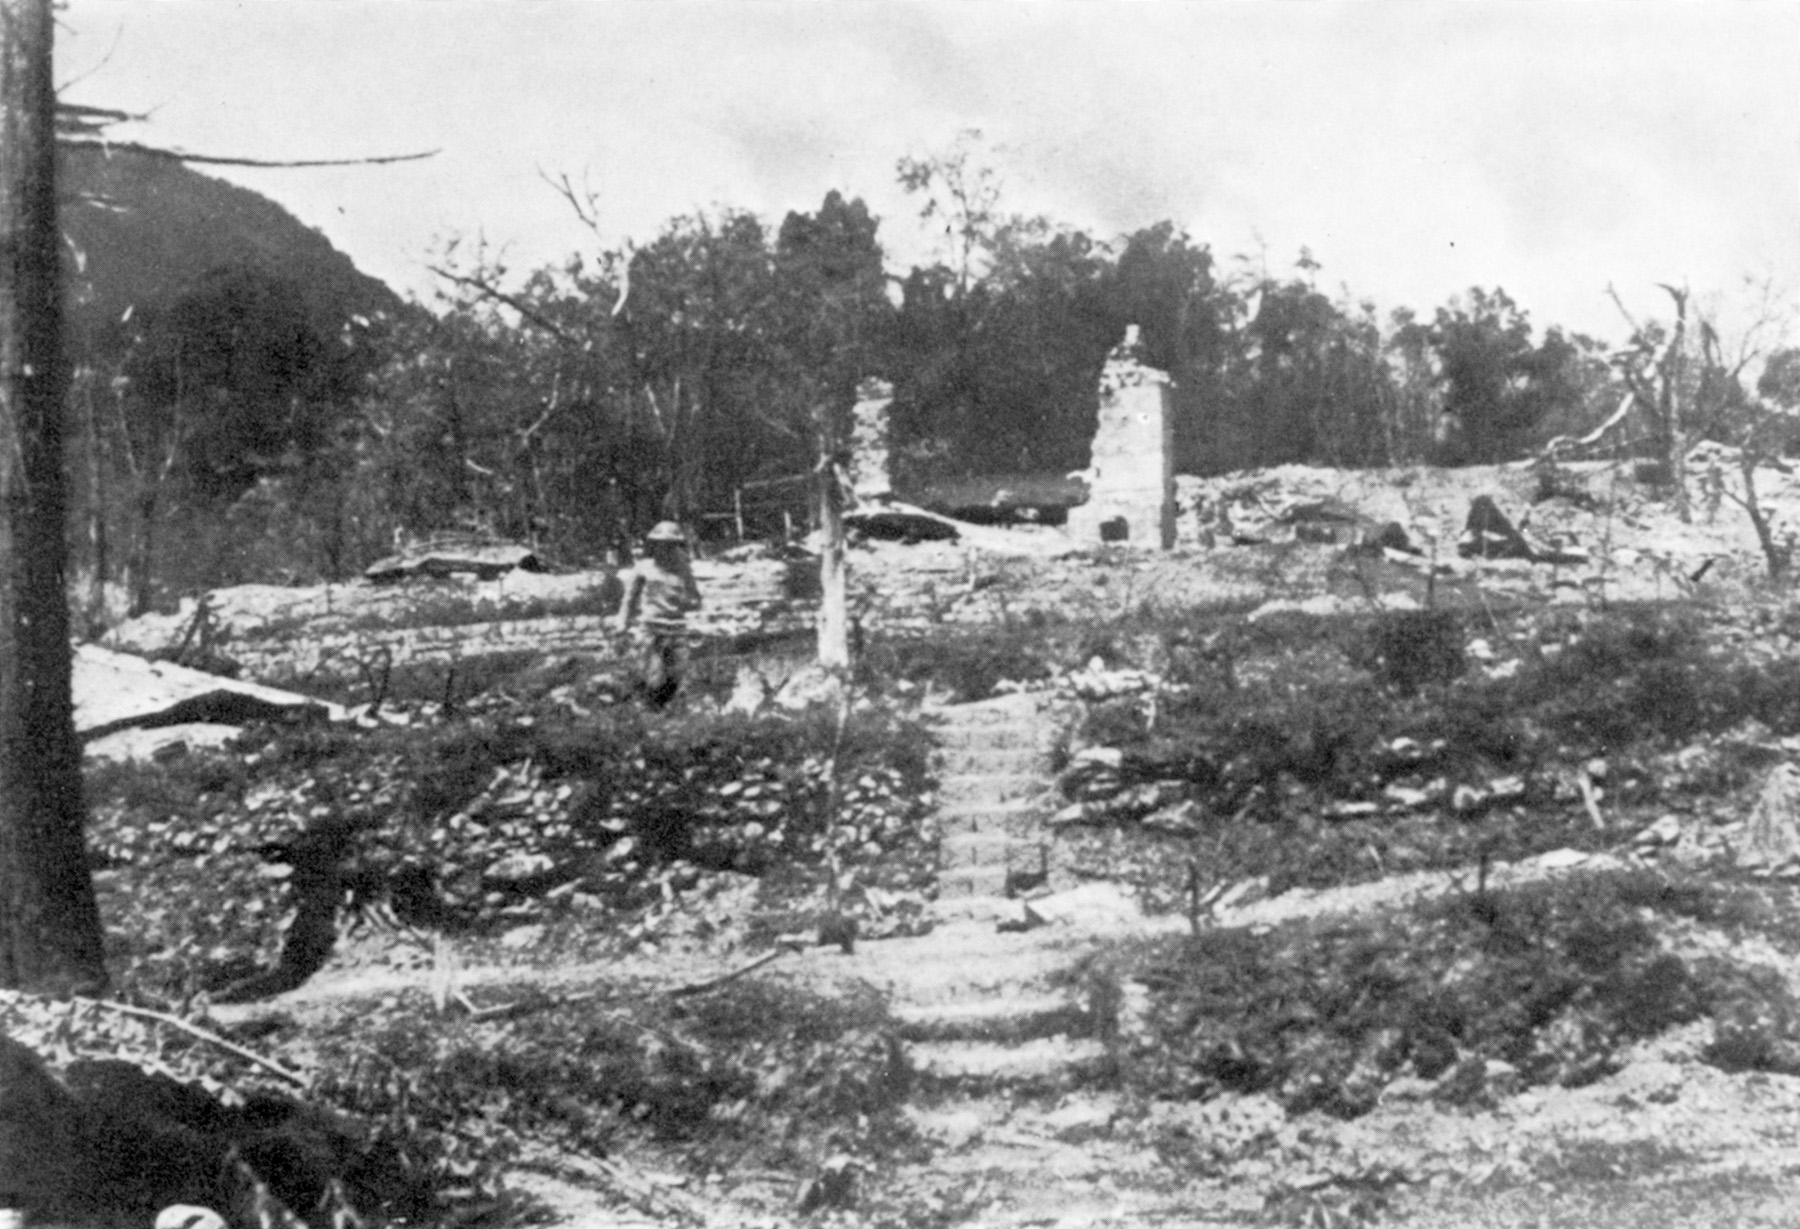 The ruins of the district commissioner’s bungalow at Kohima bear mute testimony to the savagery of the fighting. Combat took place in such close quarters that bitter fighting raged over 
control of a tactically vital tennis court. 